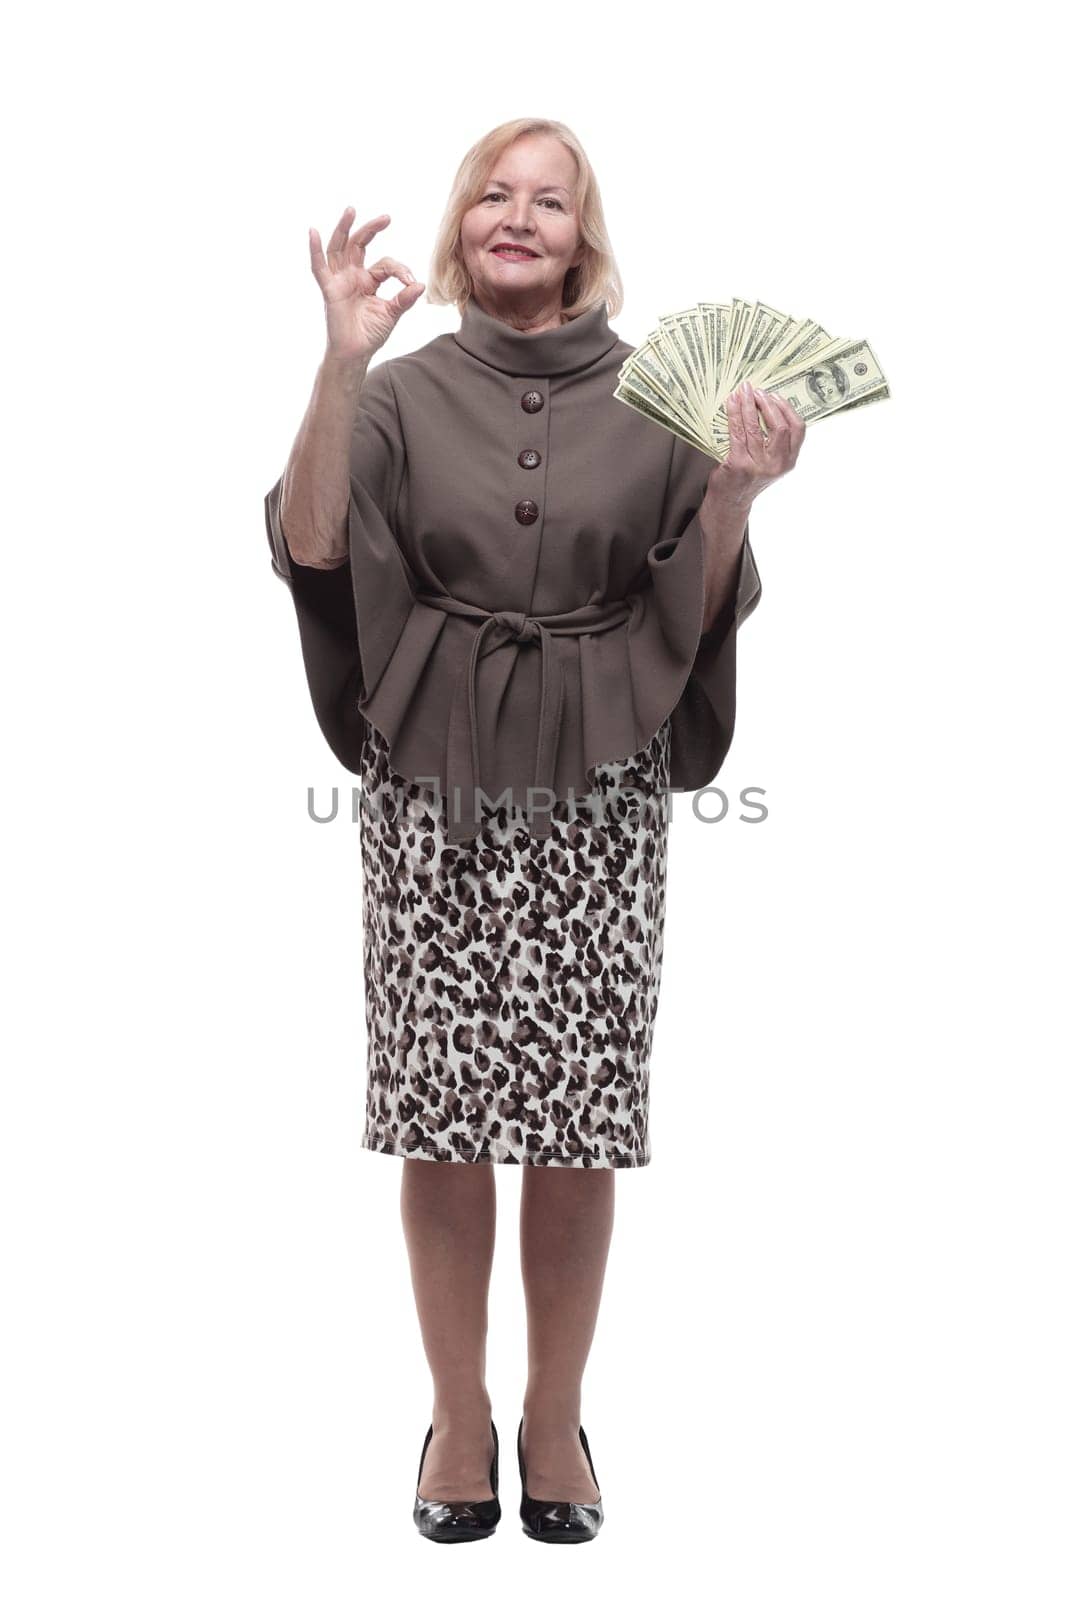 in full growth. happy mature woman with dollar bills by asdf